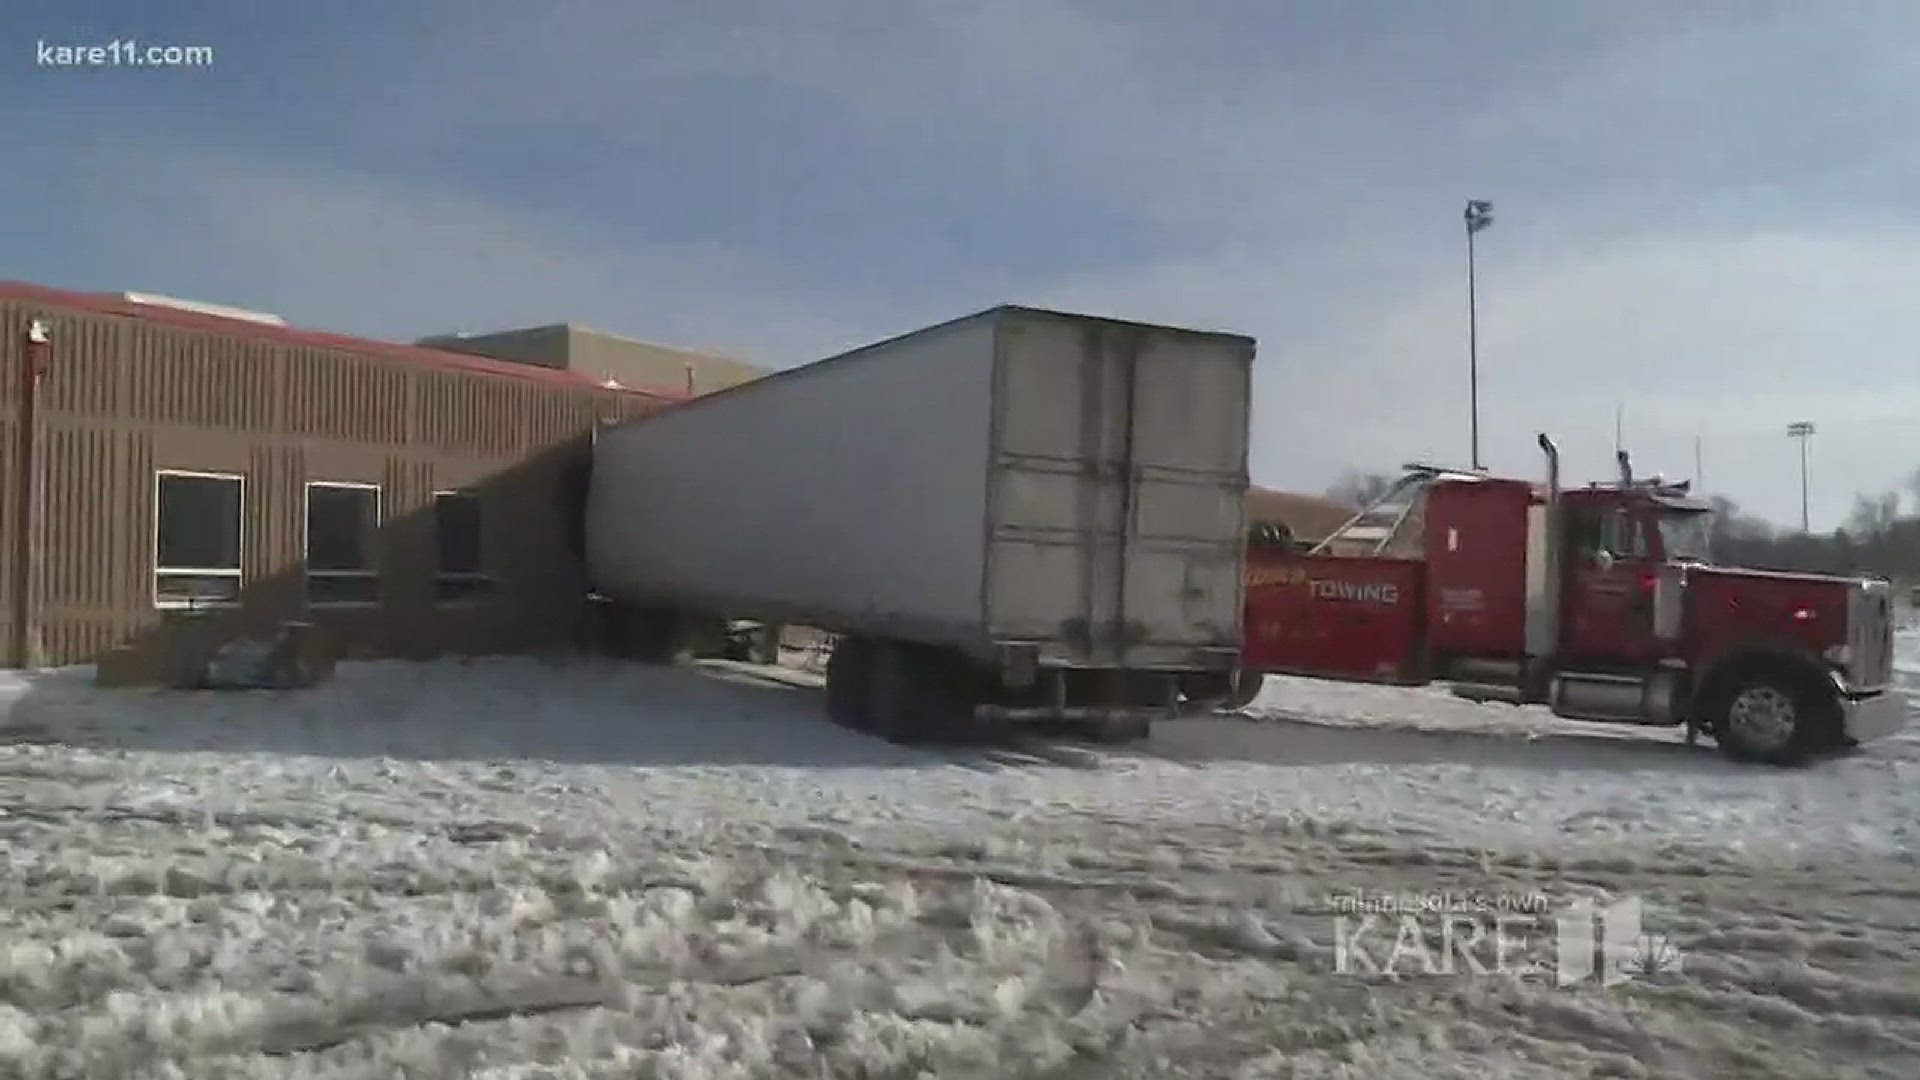 Two students were taken to the hospital after a semi barreled into a school in the small community of Lyle, Minn. Tuesday. http://kare11.tv/2DbK1qZ